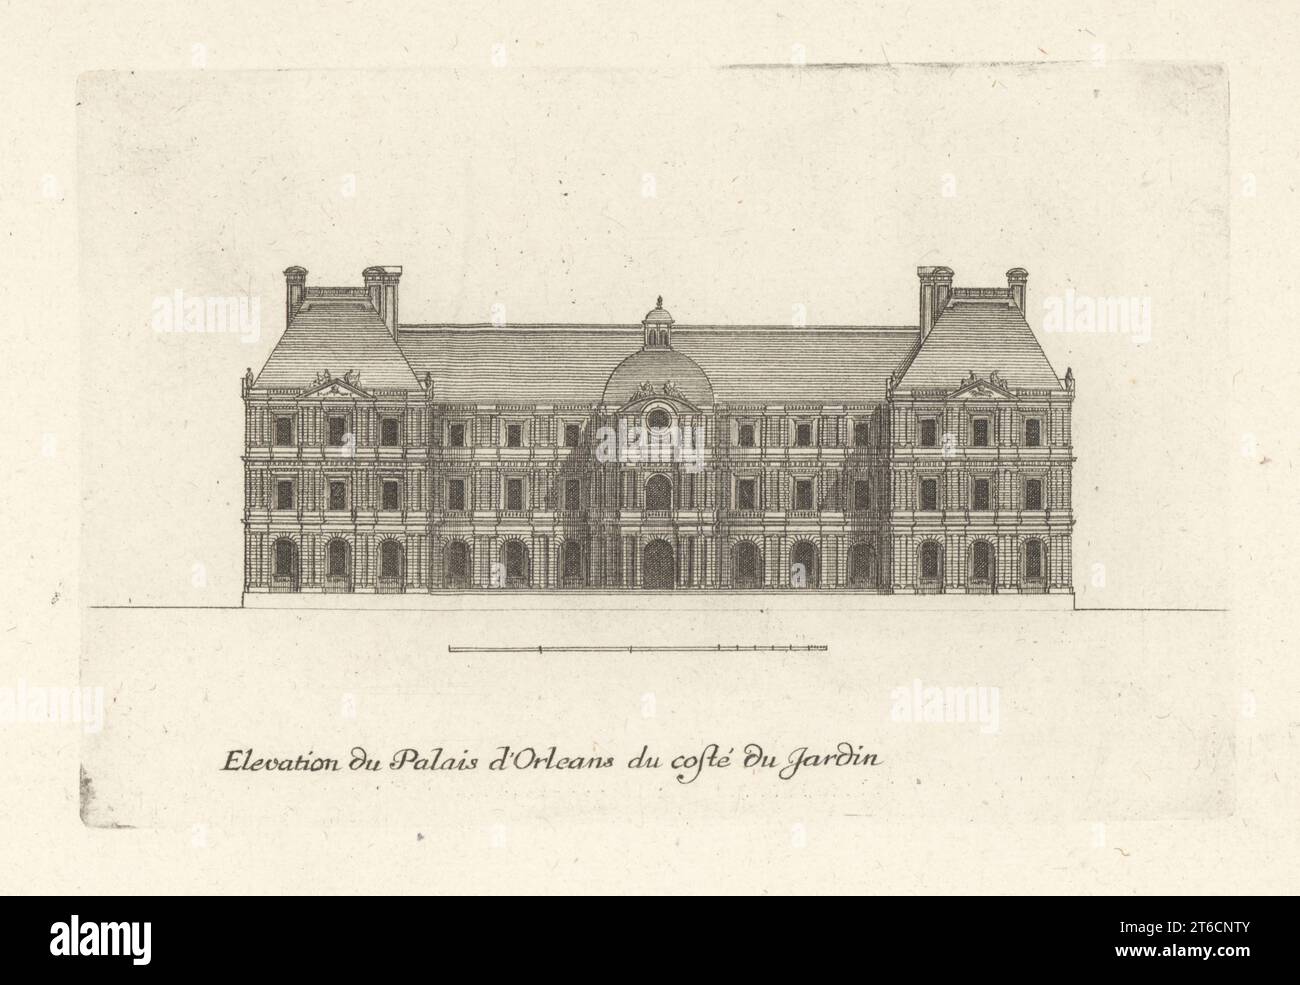 Elevation of the garden side of Luxembourg Palace (Palais du Luxembourg), built to the designs of French architect Salomon de Brosse for Marie de' Medici. Elevation du Palais d'Orleans du cote du jardin. Copperplate engraving drawn and engraved by Jean Marot from his Recueil des Plans, Profils et Elevations de Plusieurs Palais, Chasteaux, Eglises, Sepultures, Grotes et Hotels,Collection of Plans, Profiles and Elevations of Palaces, Castles, Churches, Tombs, Grottos and Hotels, chez Mariette, Paris, 1655. Stock Photo